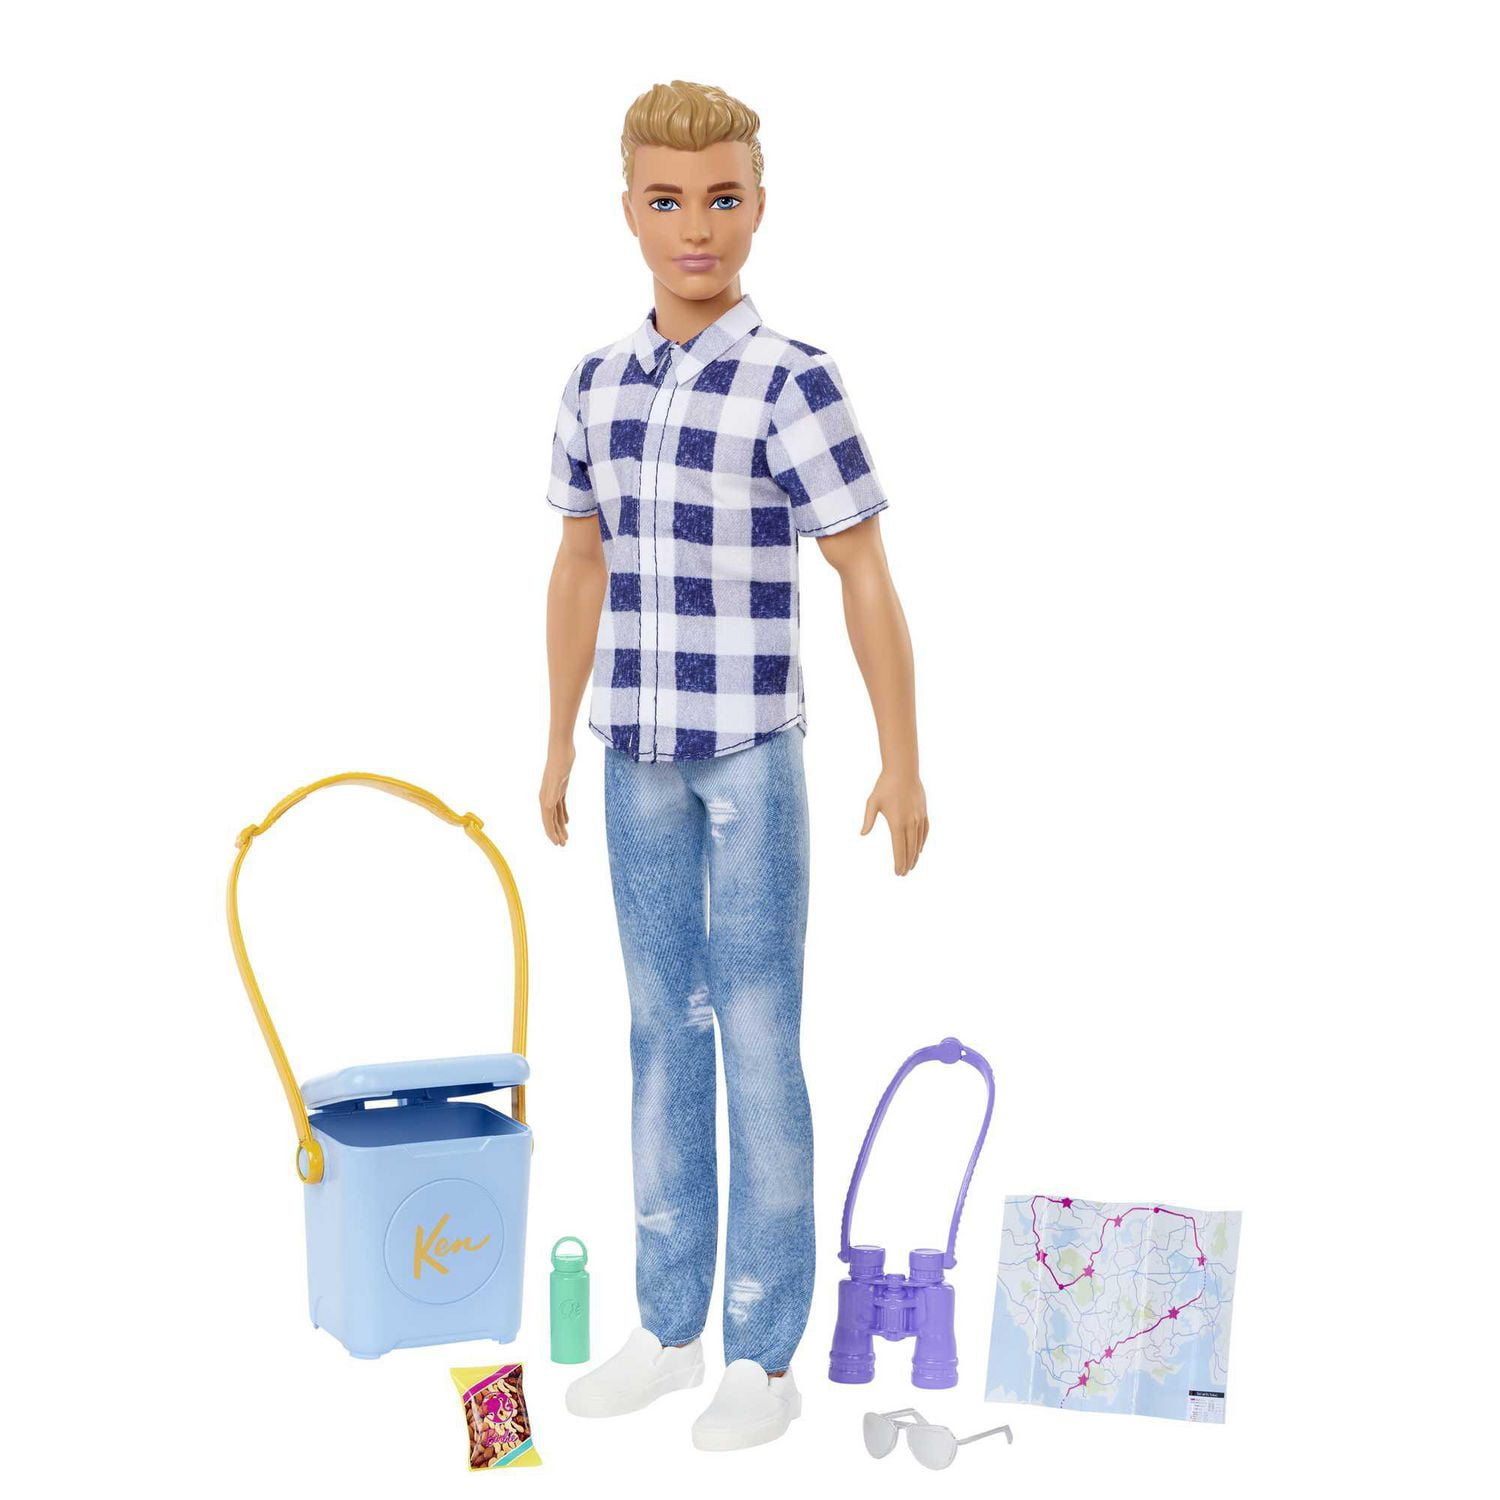 Barbie Life in the Dreamhouse Ken Dream House Articulated Boy